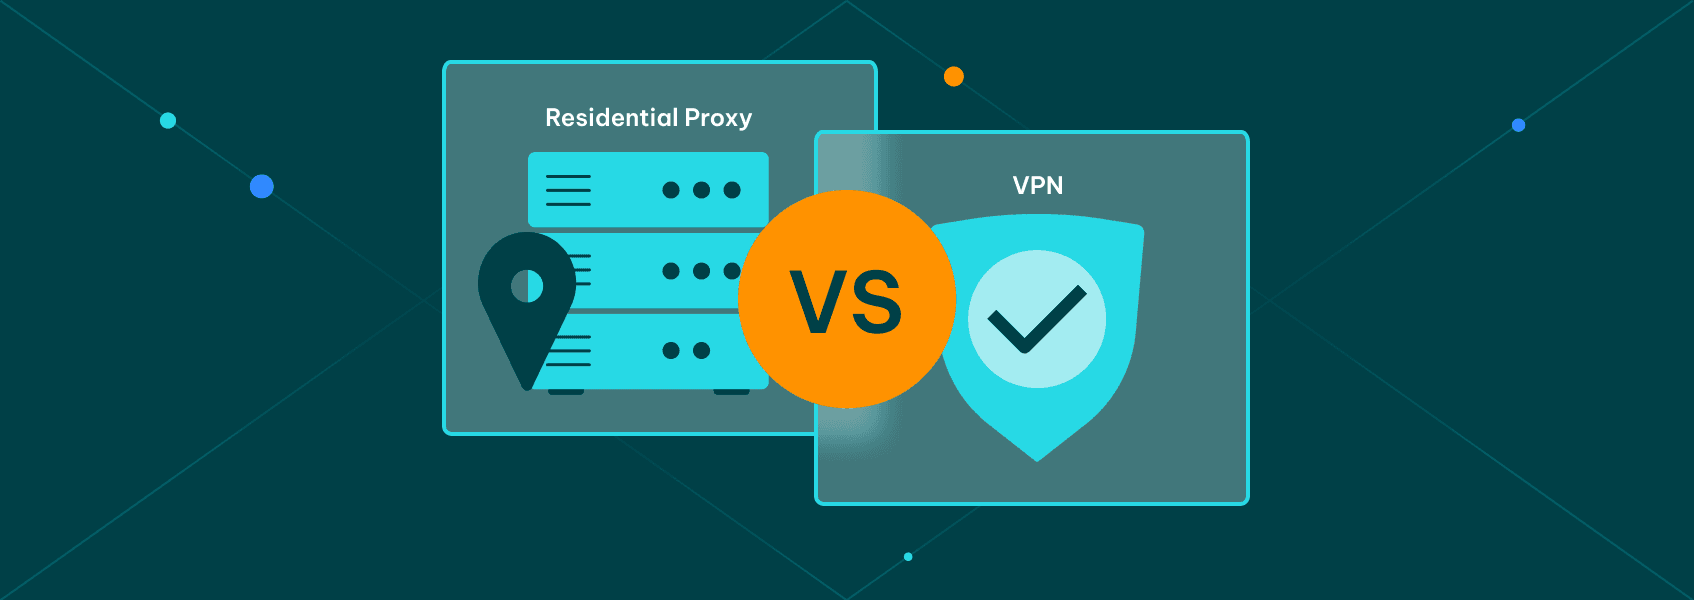 Residential Proxy Vs. VPN – All You Need to Know